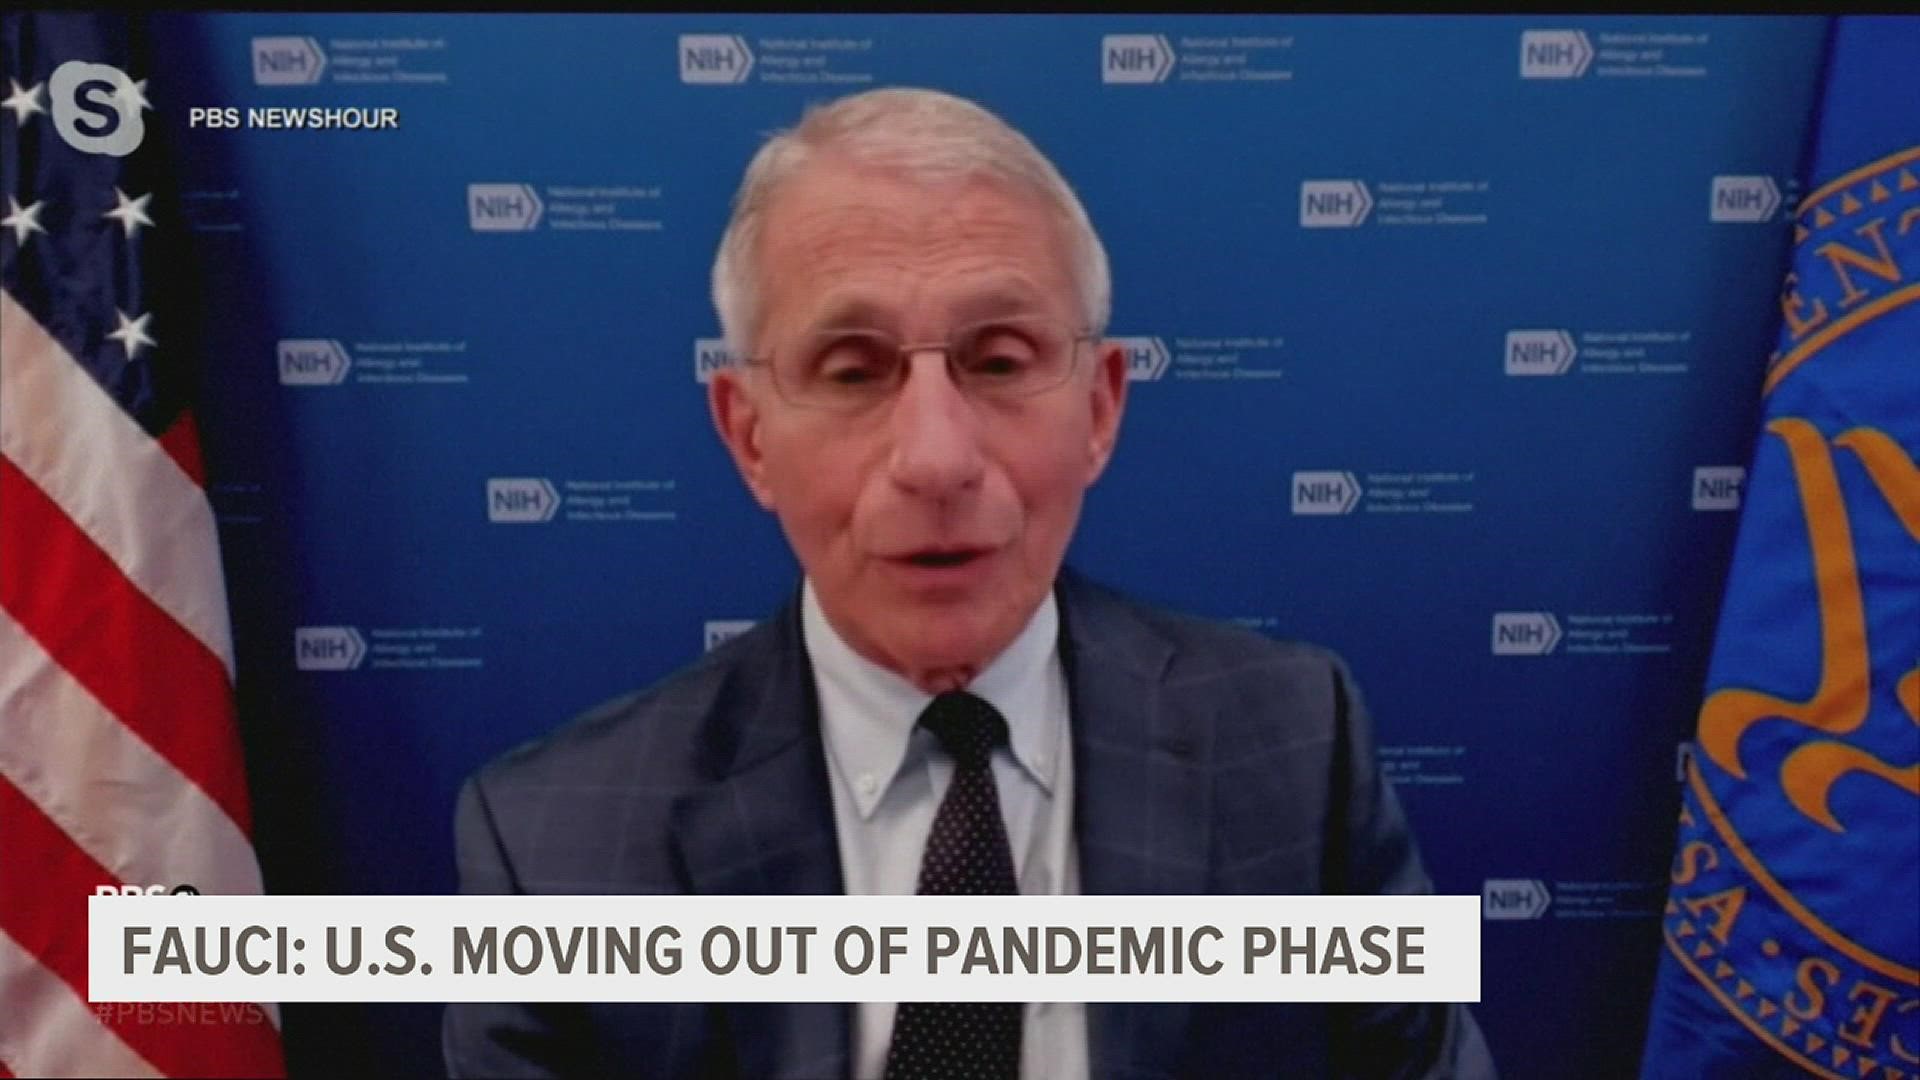 Dr. Anthony Fauci said while the COVID pandemic will likely last for some time, the U.S. can continue to maintain low transmission and death rates with vaccines.